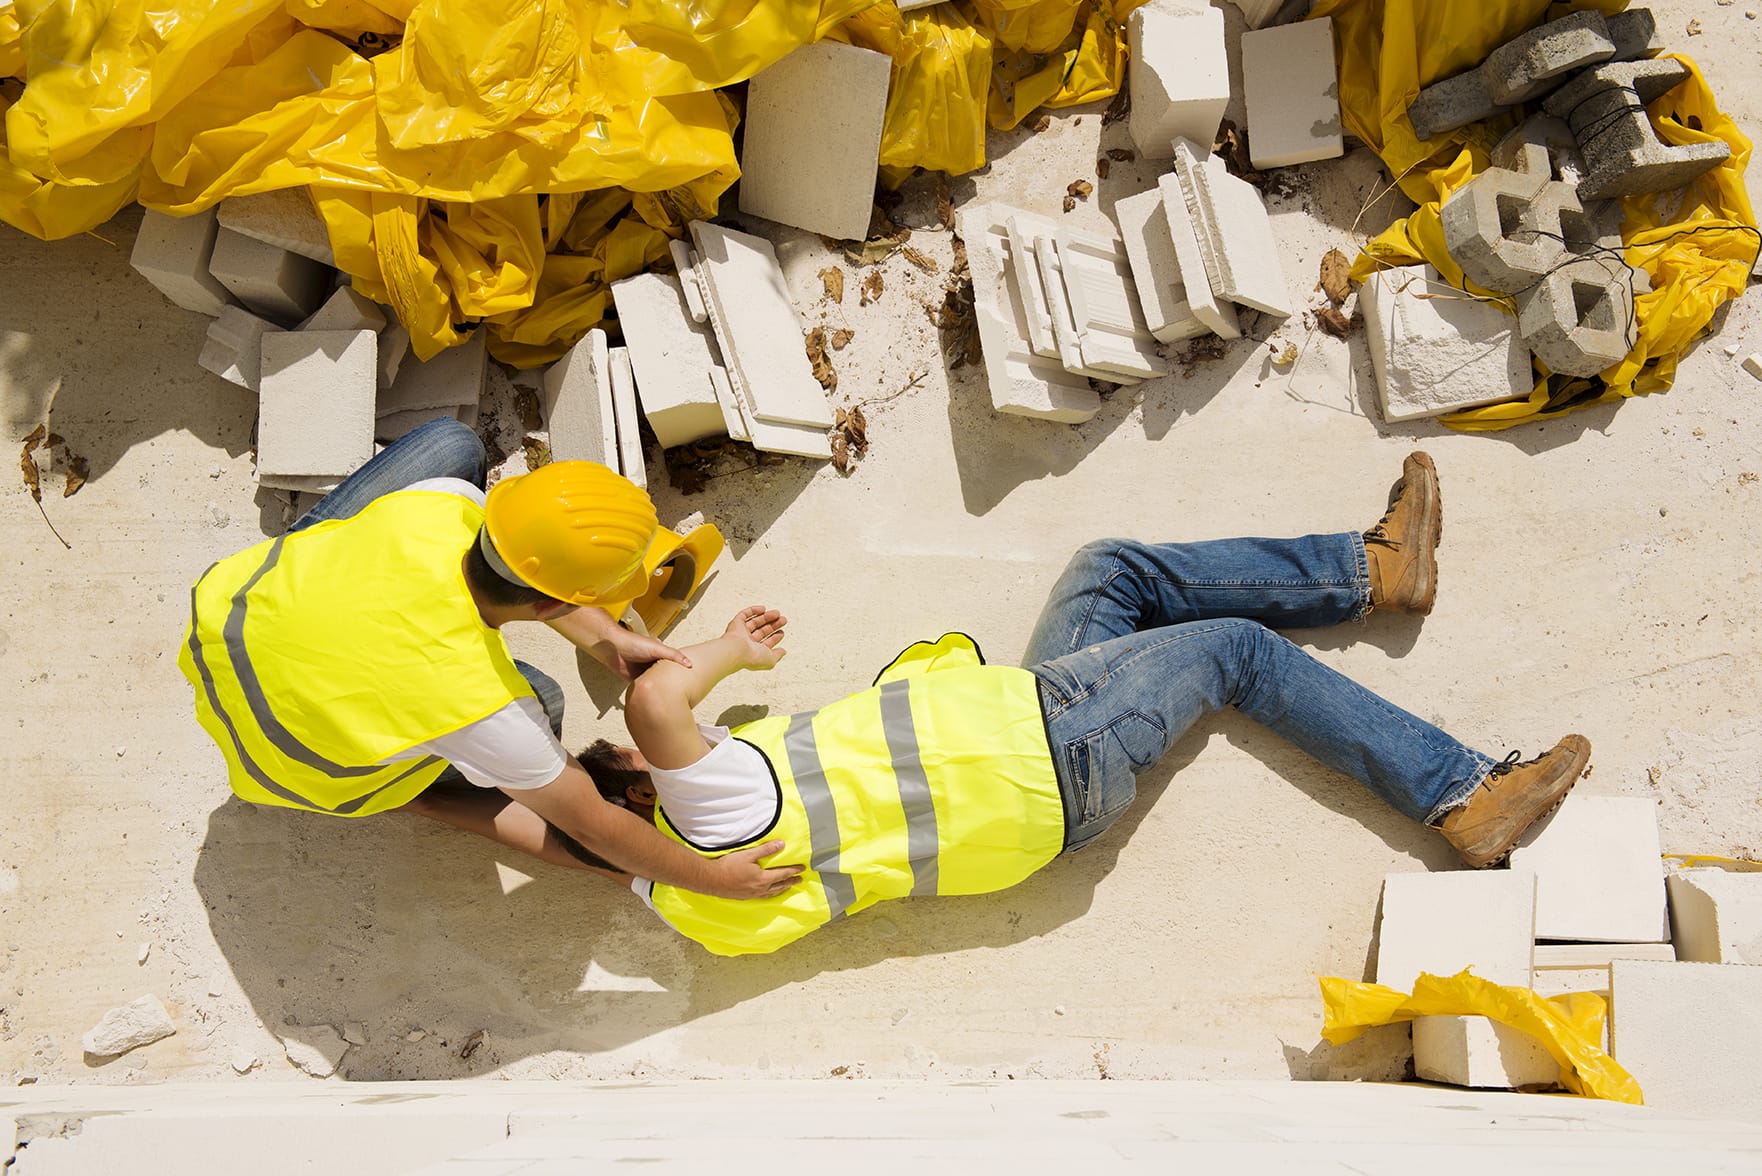 Checklist for an accident at work